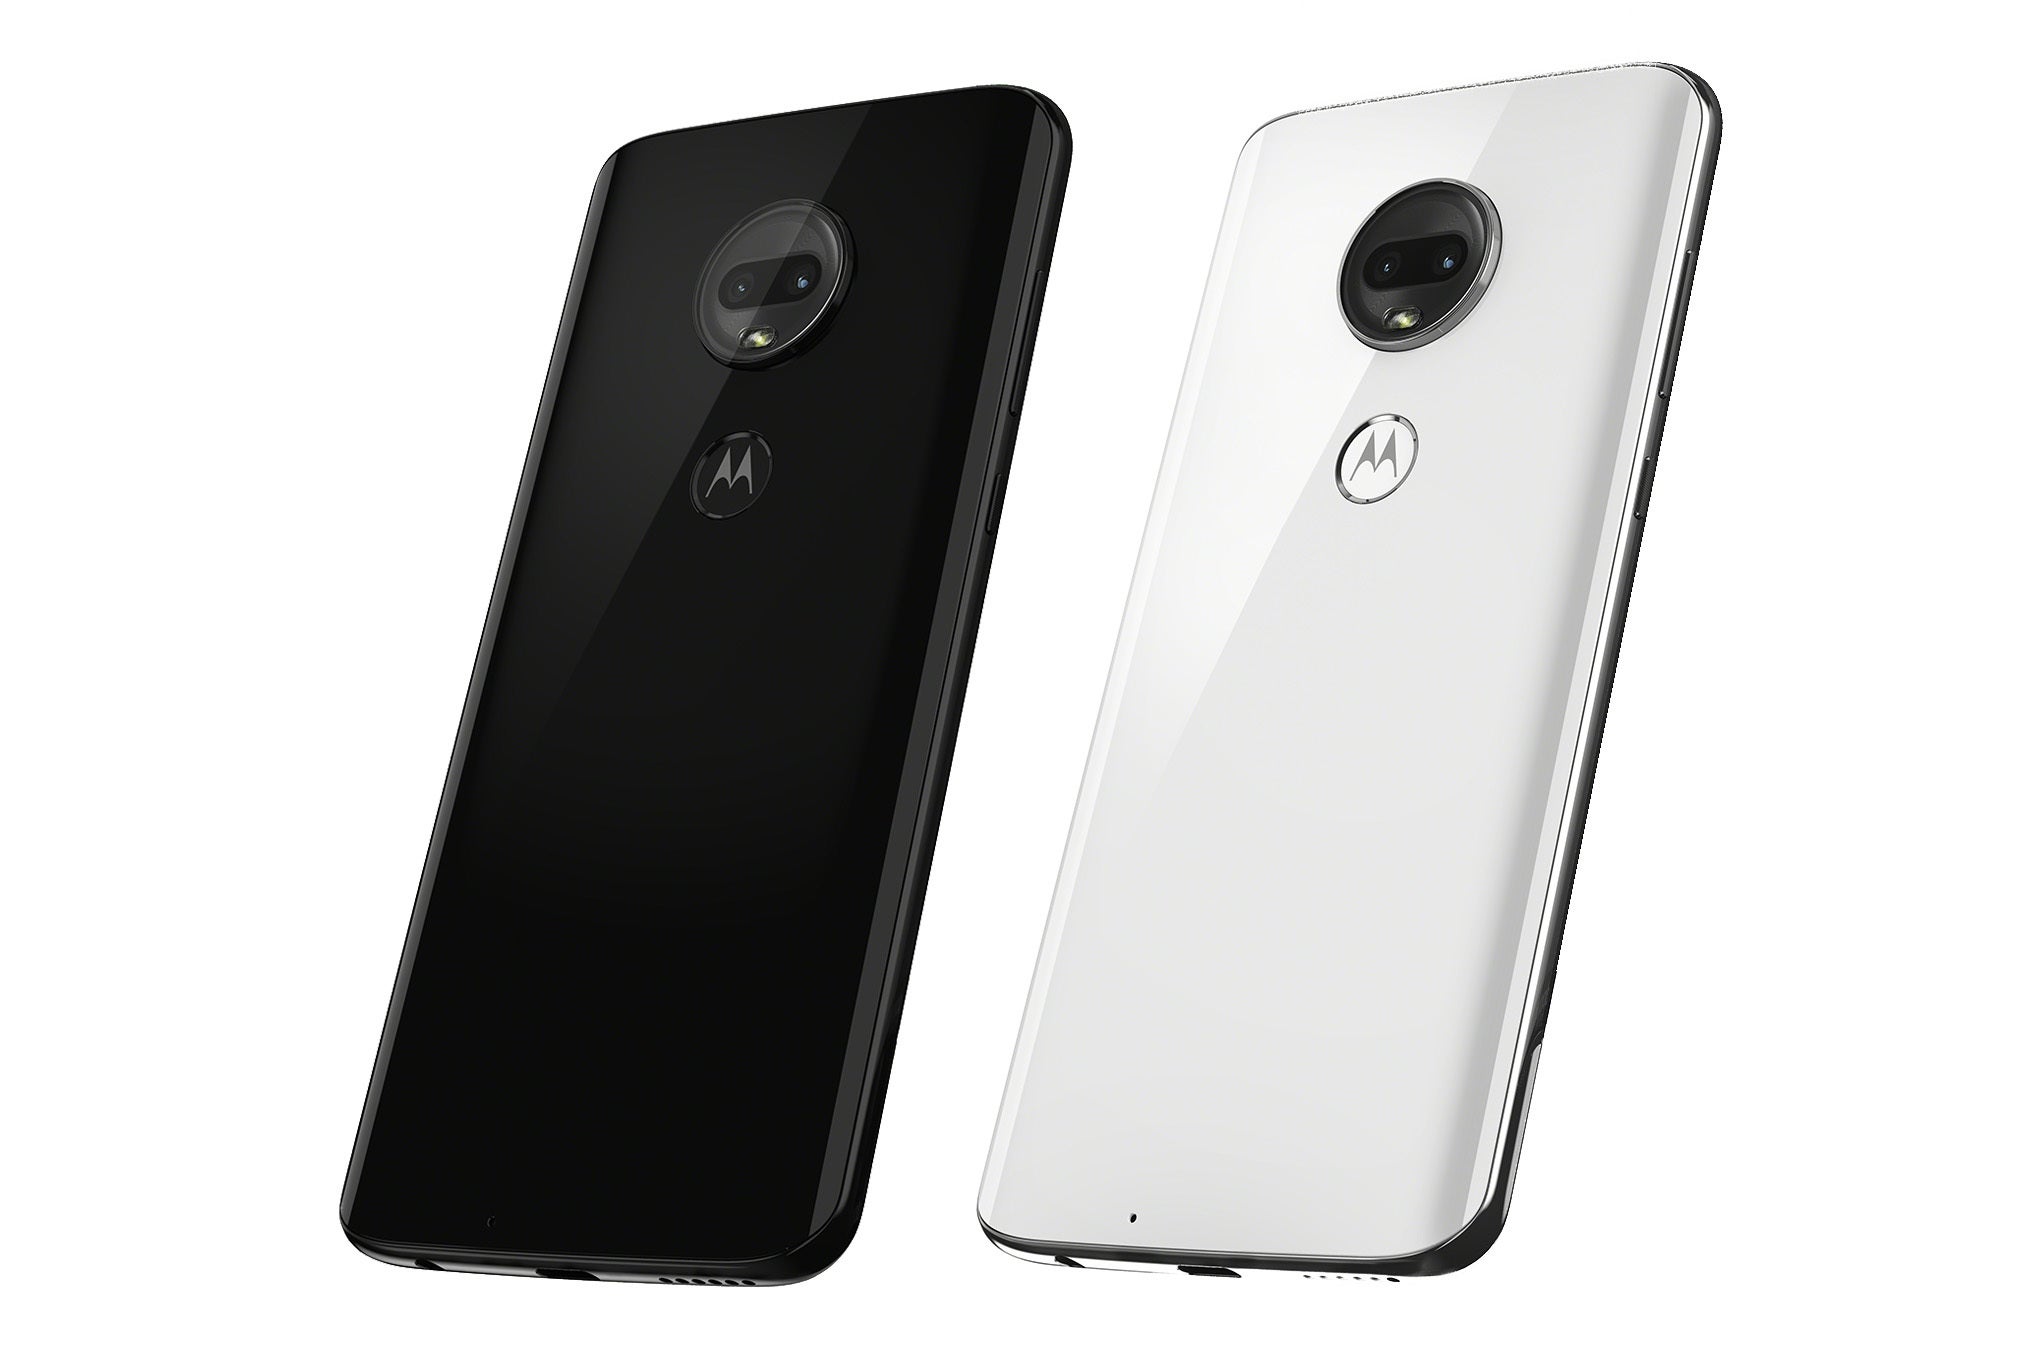 The G7 in its two colors, ceramic black and clear white - Motorola officially unveils its 2019 Moto G series: the Moto G7, G7 Play, G7 Power and G7 Plus